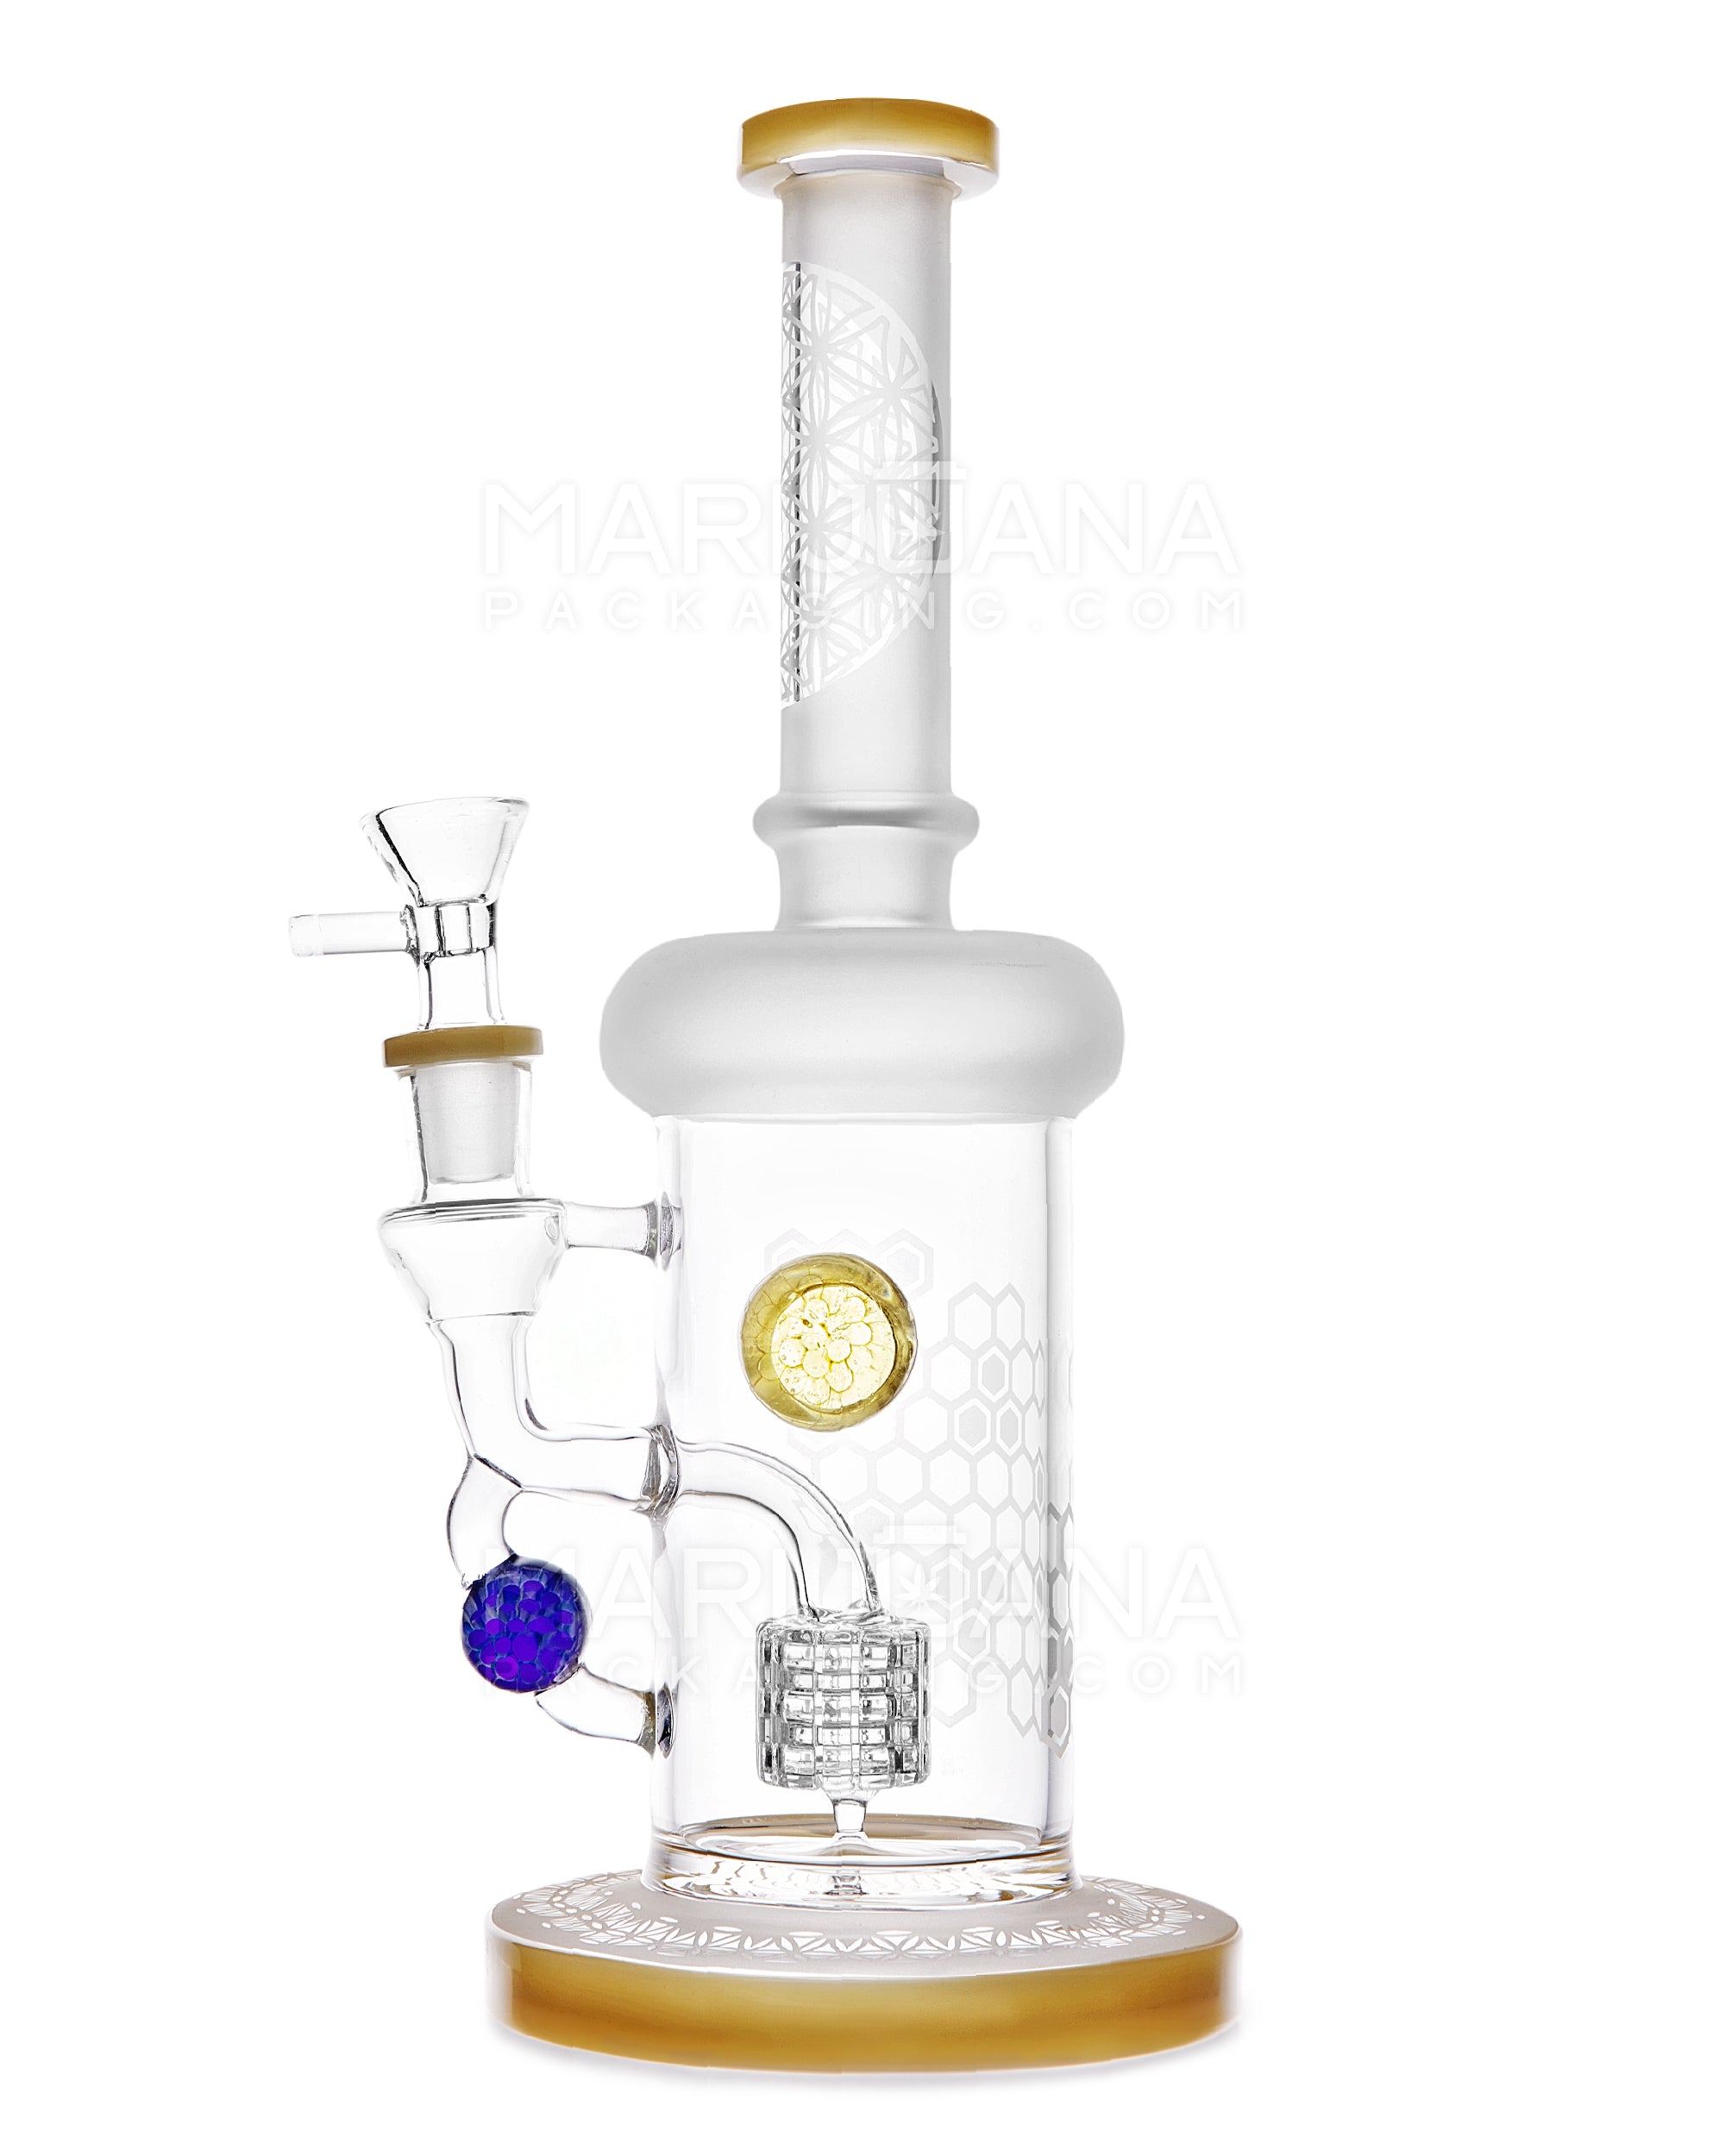 USA Glass | Straight Neck Matrix Perc Sandblasted Glass Water Pipe w/ Implosion Marbles | 11in Tall - 14mm Bowl - Yellow - 1